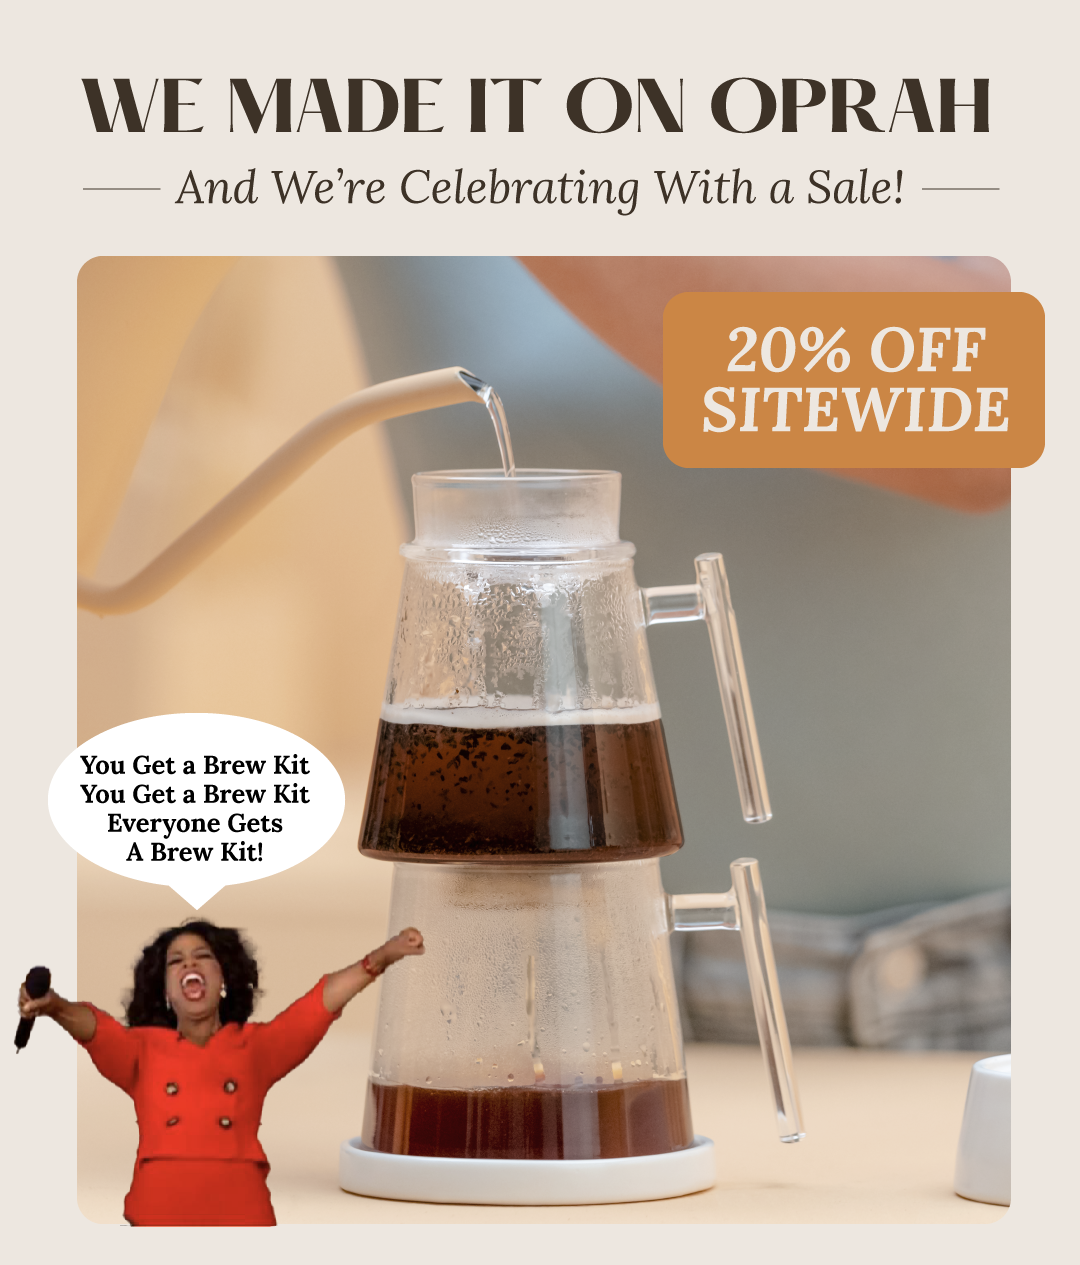 20% off sitewide for oprah